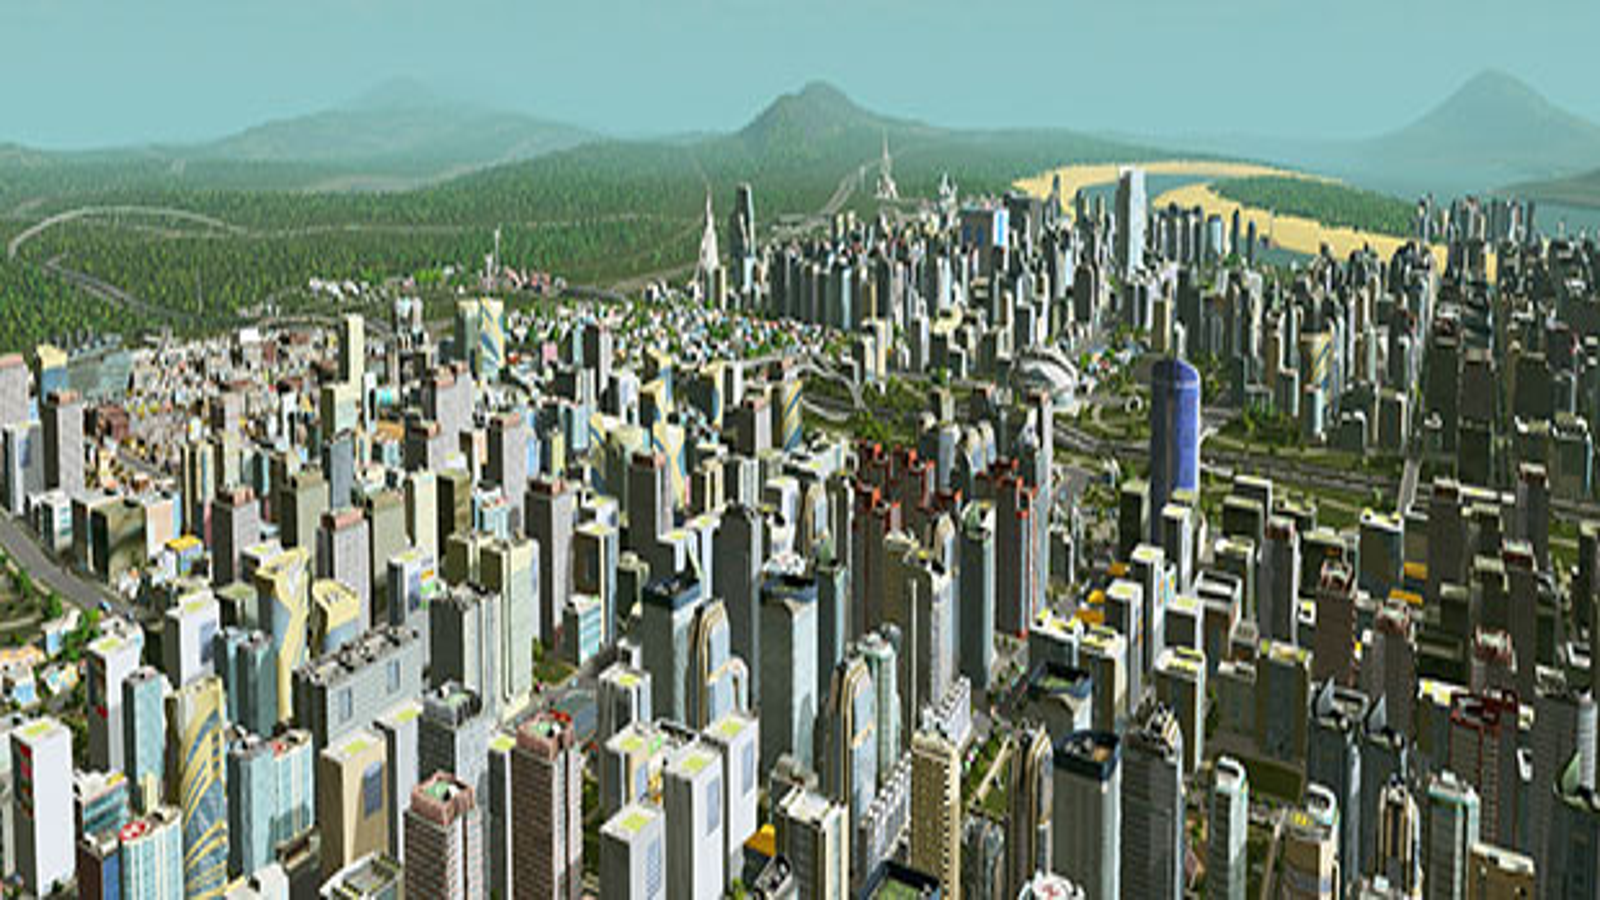 Cities Skylines (PS4) - iPon - hardware and software news, reviews